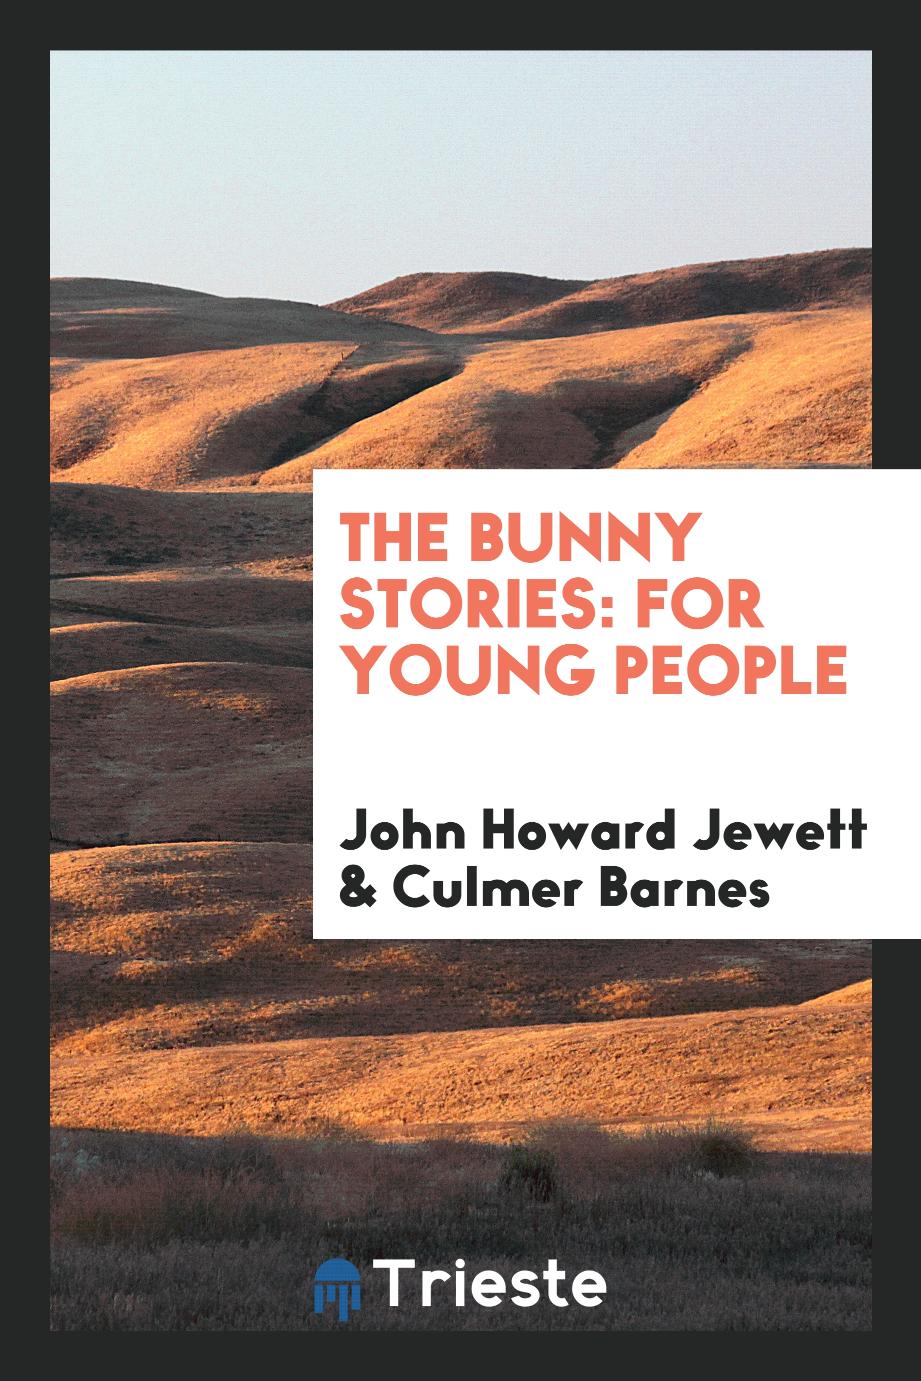 The Bunny Stories: For Young People